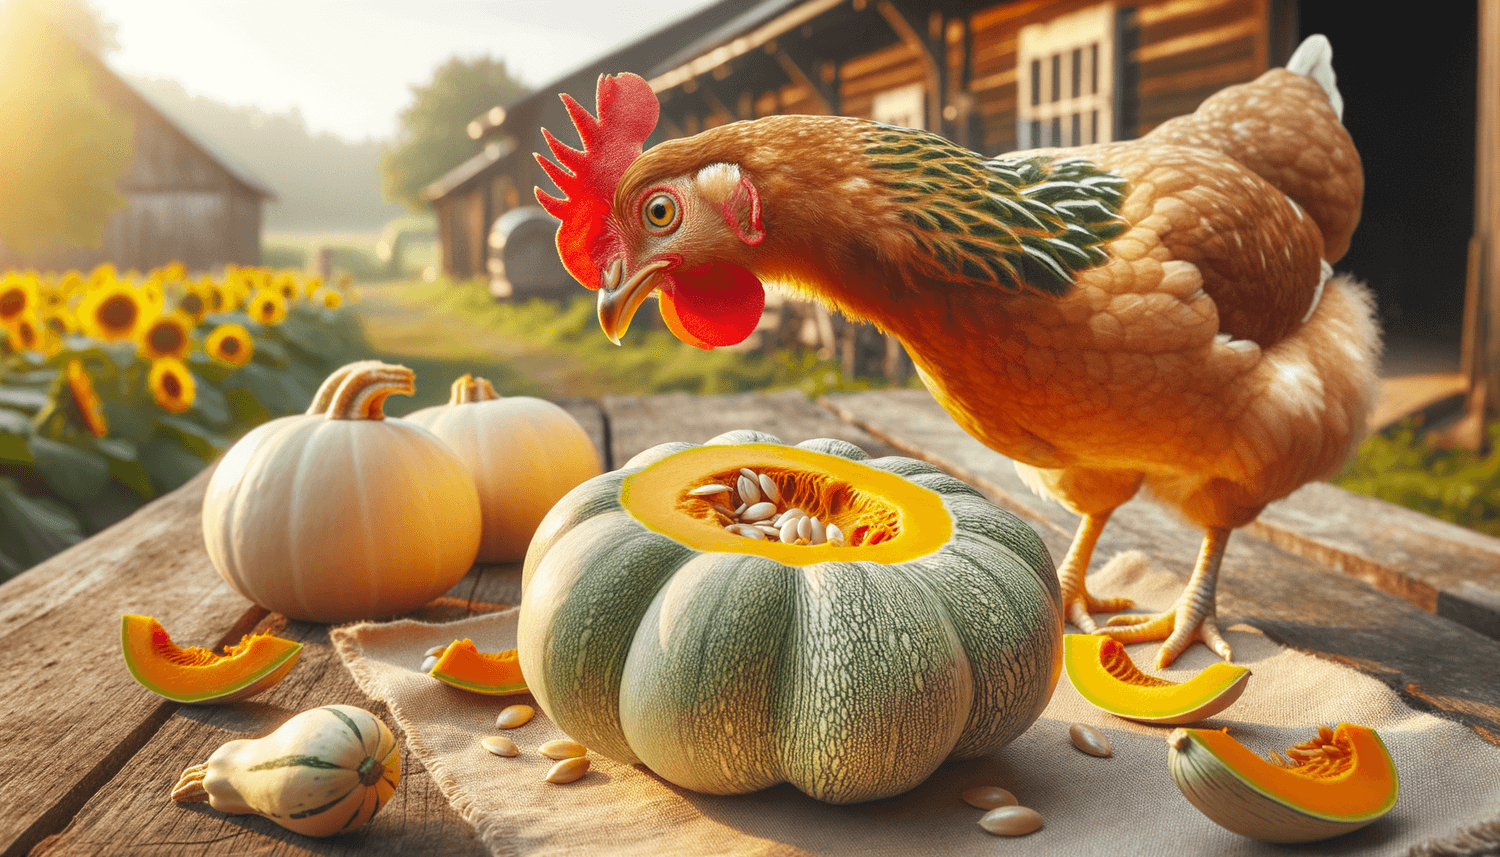 Can Chickens Eat Raw Squash?